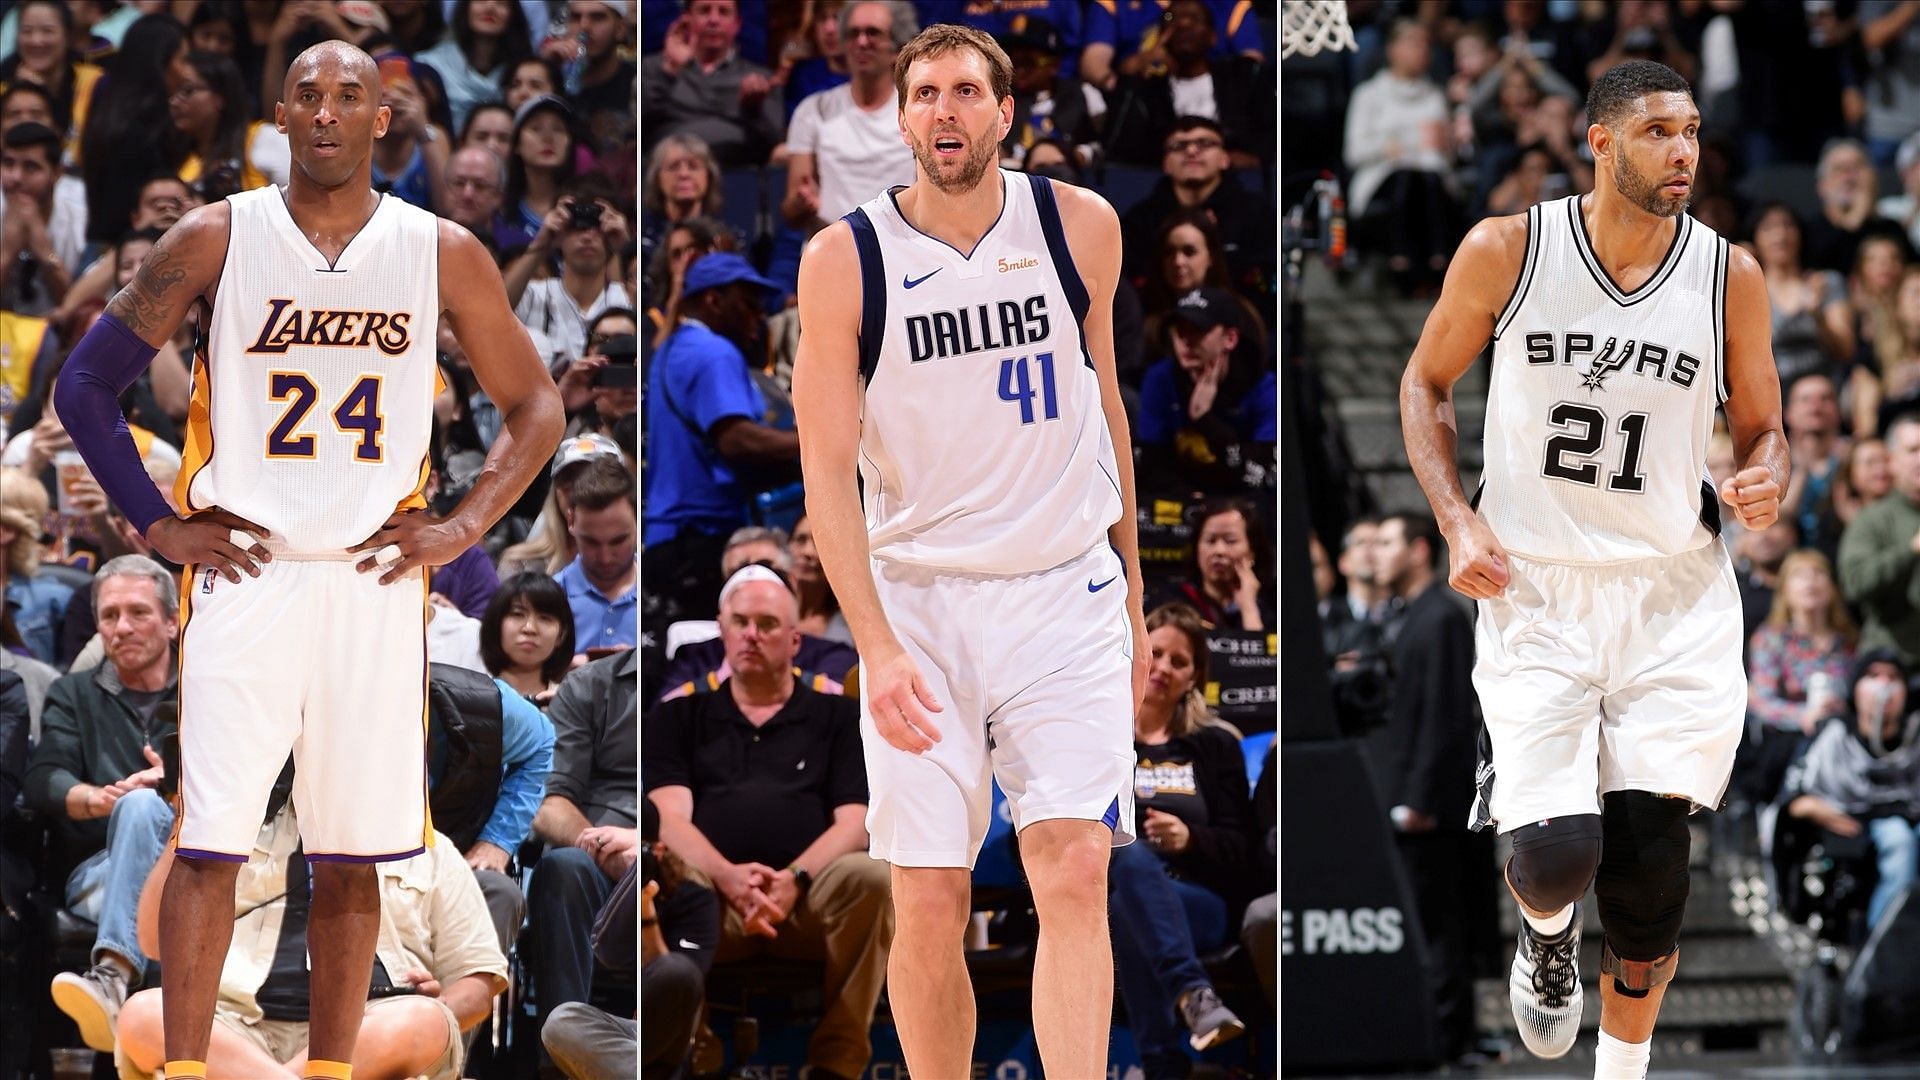 Kobe Bryant, Dirk Nowitzki and Tim Duncan made the NBA their personal battleground for almost two decades [Photo: NBA.com Canada]